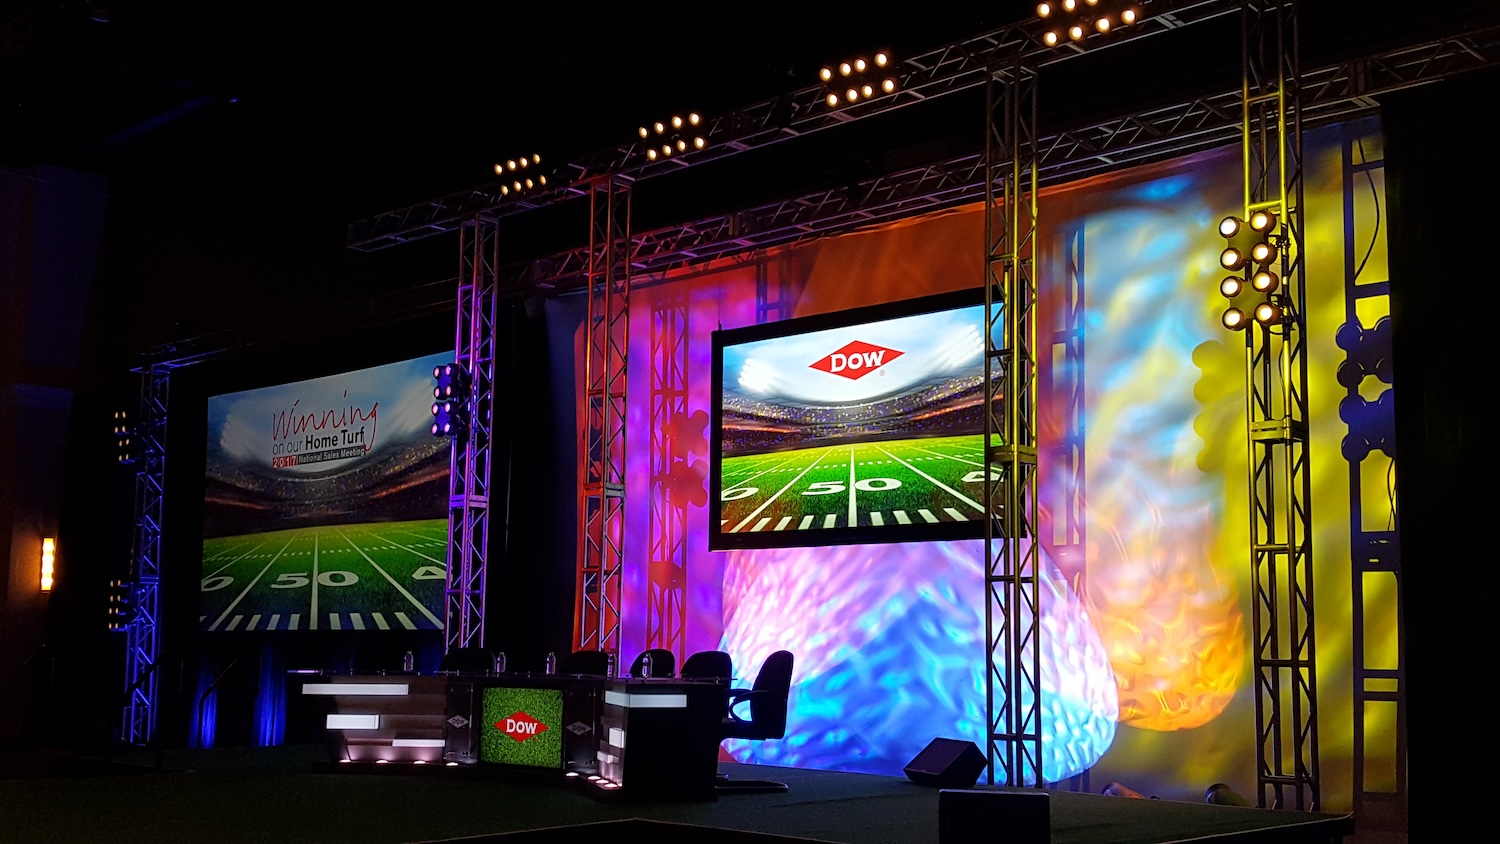 An event stage with colorful lighting, featuring screens with 'Winning on our Home Turf' and the Dow logo, set for a presentation or conference.